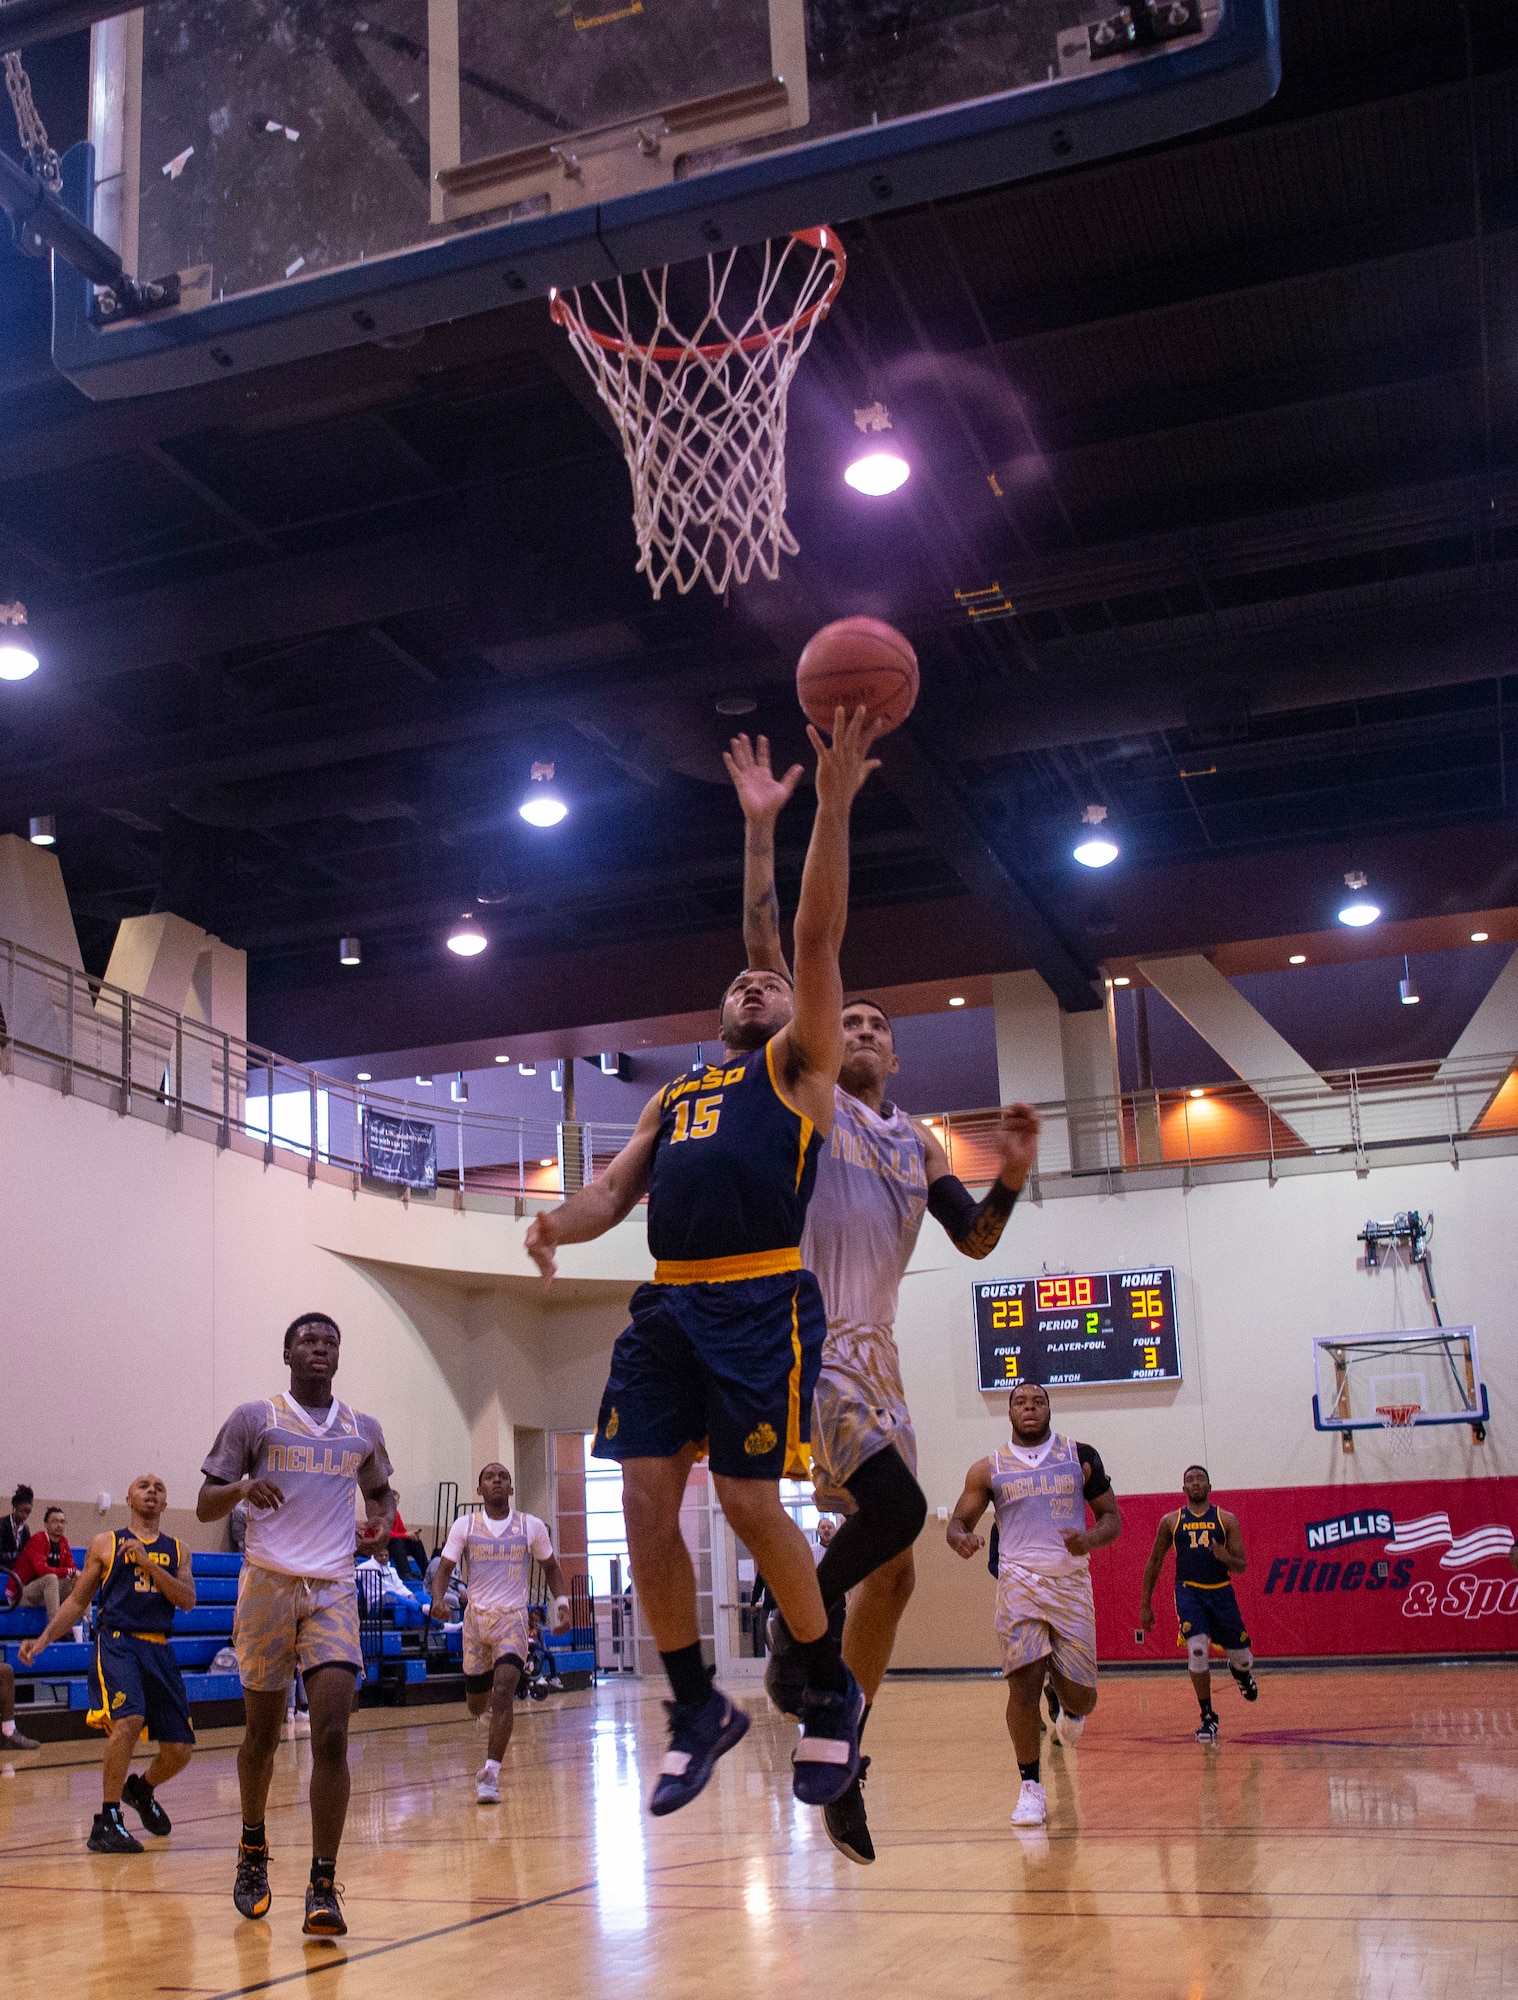 Naval Base San Diego Tritons basketball player goes for a layup